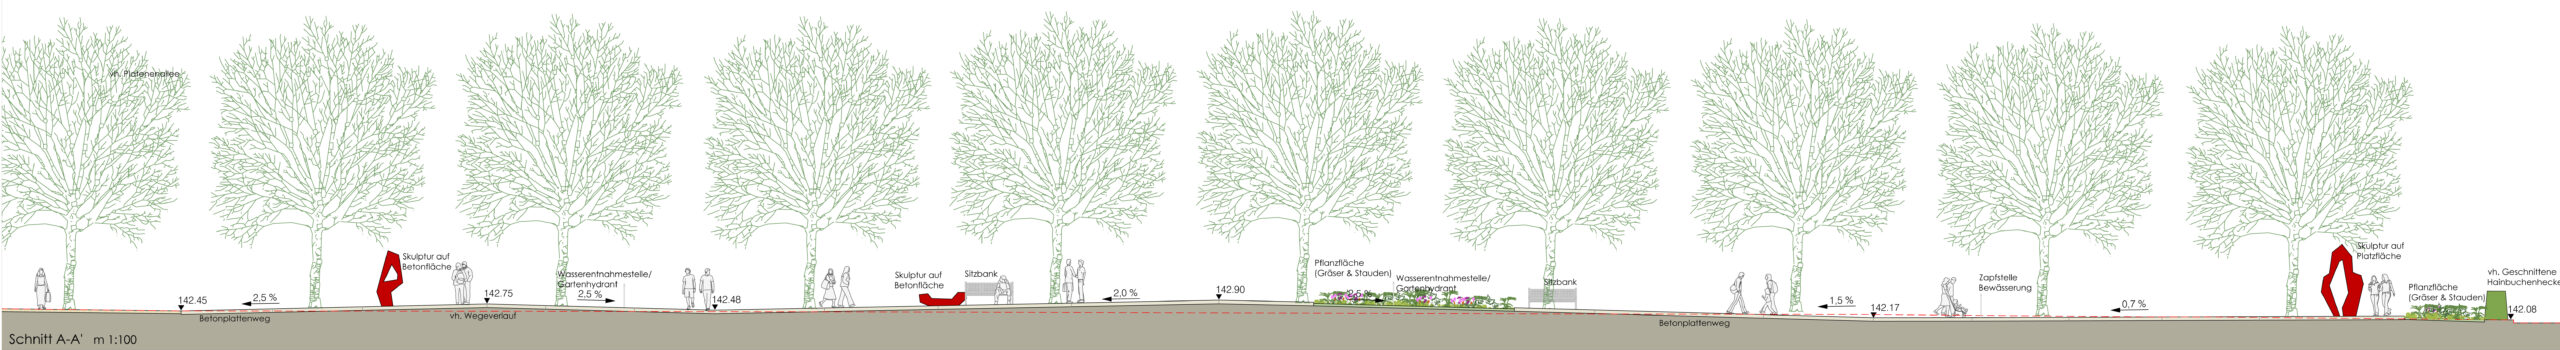 Place Dr F. Kons – Creation of green space